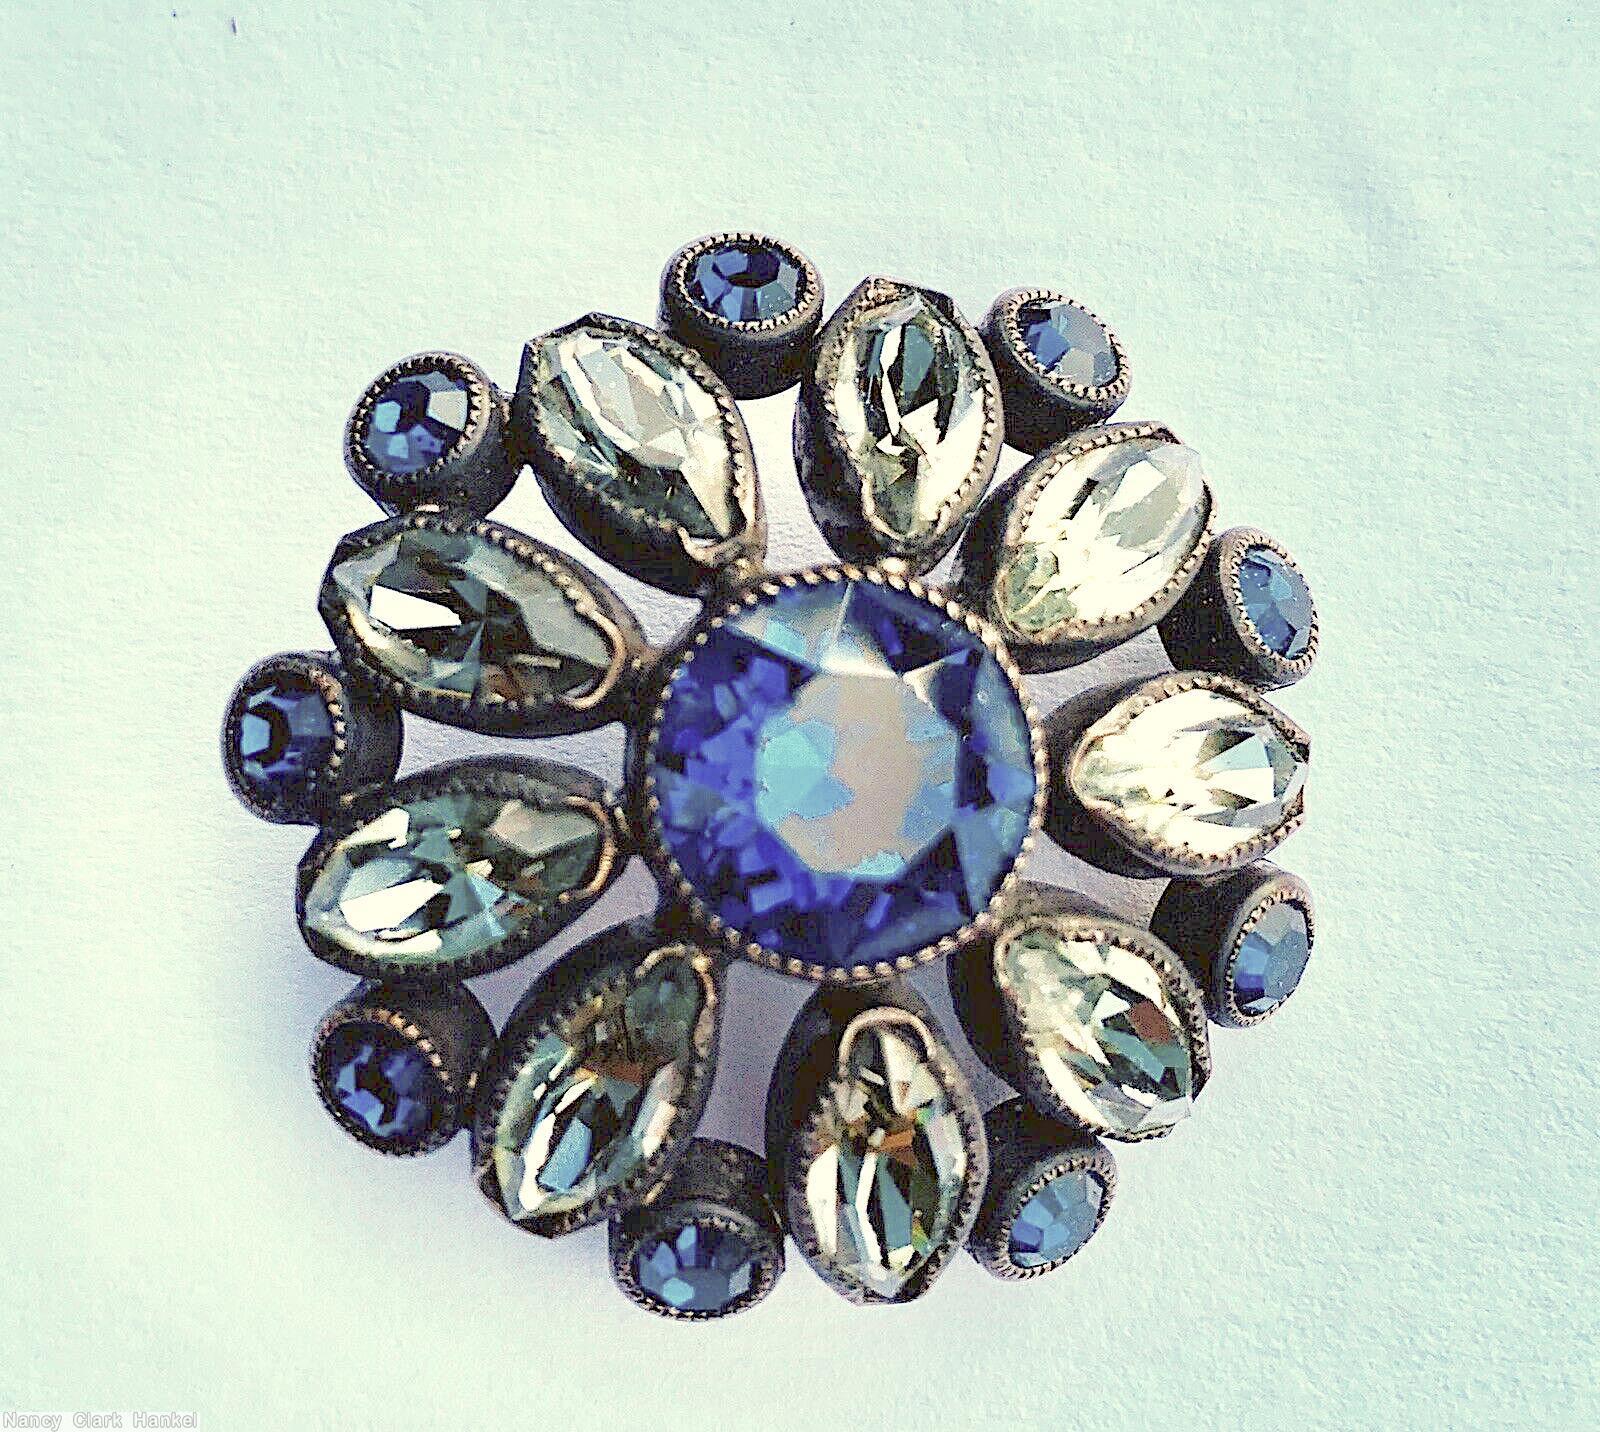 Schreiner radial domed 2 rounds round button large chaton center 9 navette surrounding 9 small chaton blue chaton crystal navette jewelry